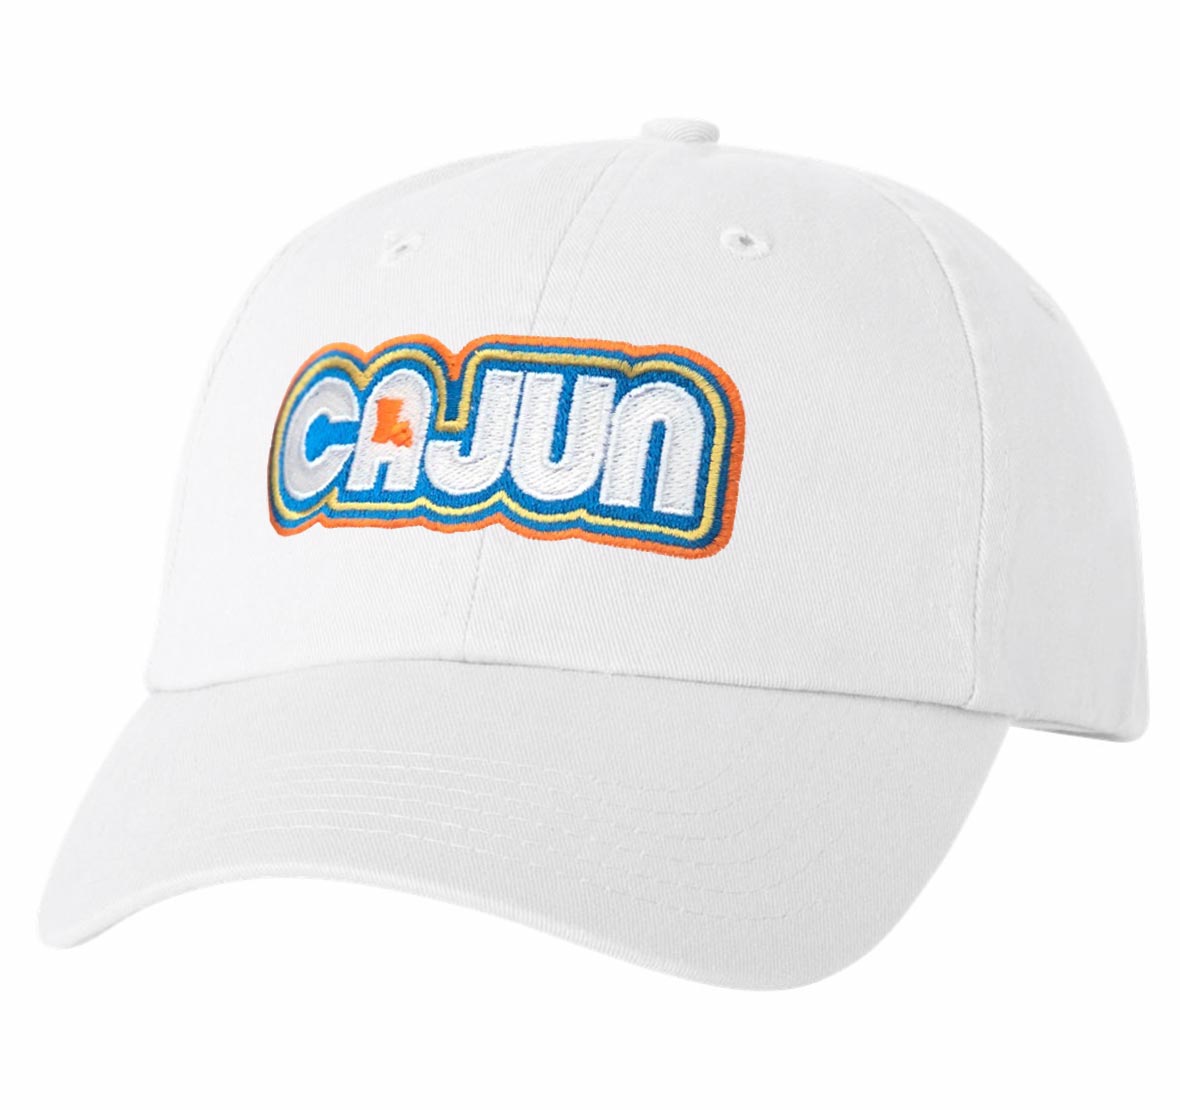 Retro Cajun Dad Hat by Gusto Graphic Tees - Louisiana hat, Front View of hat